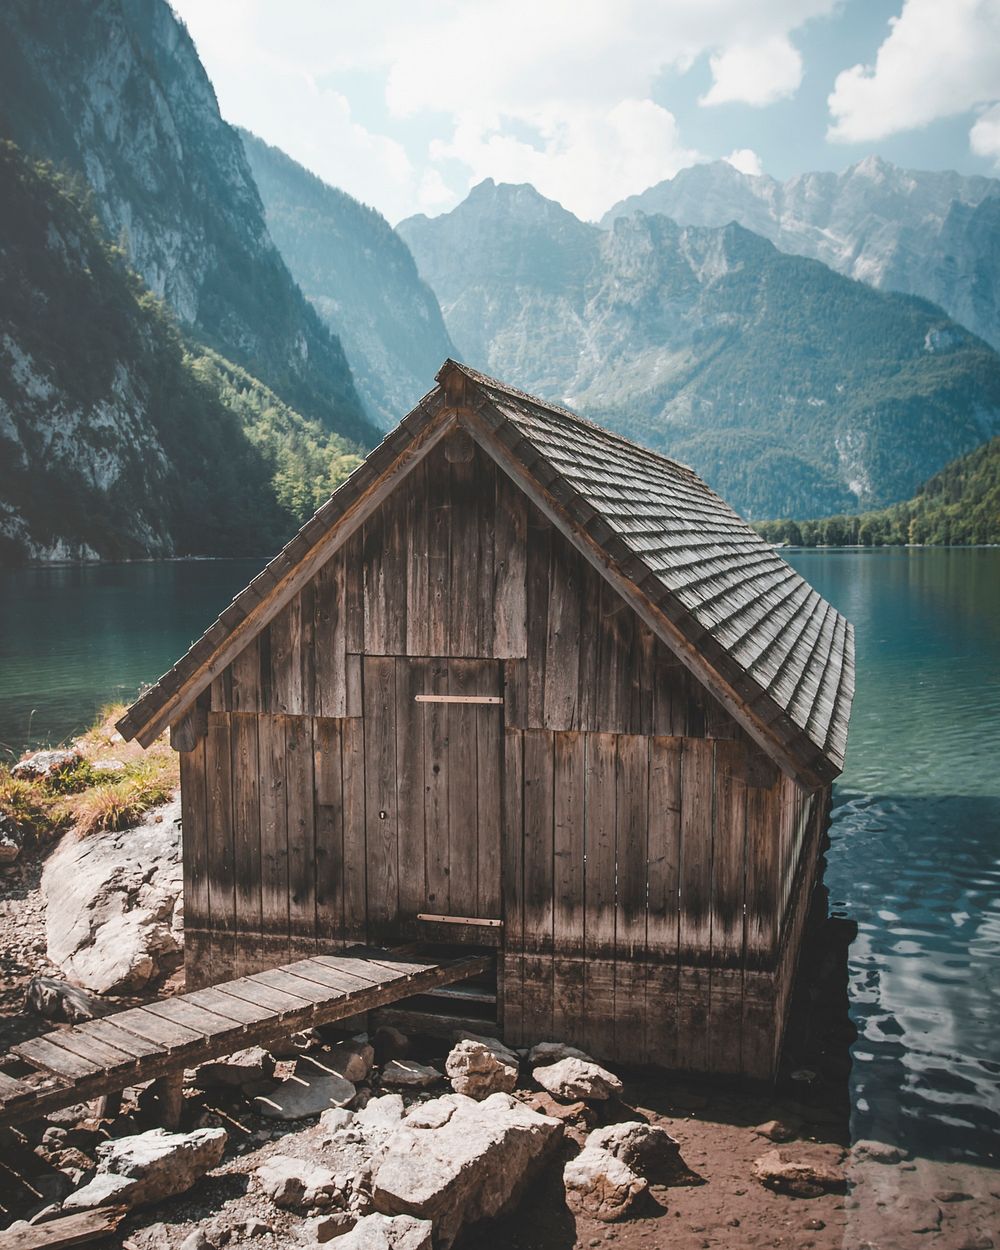 Log cabin by the lake in Fischunkelalm, Germany